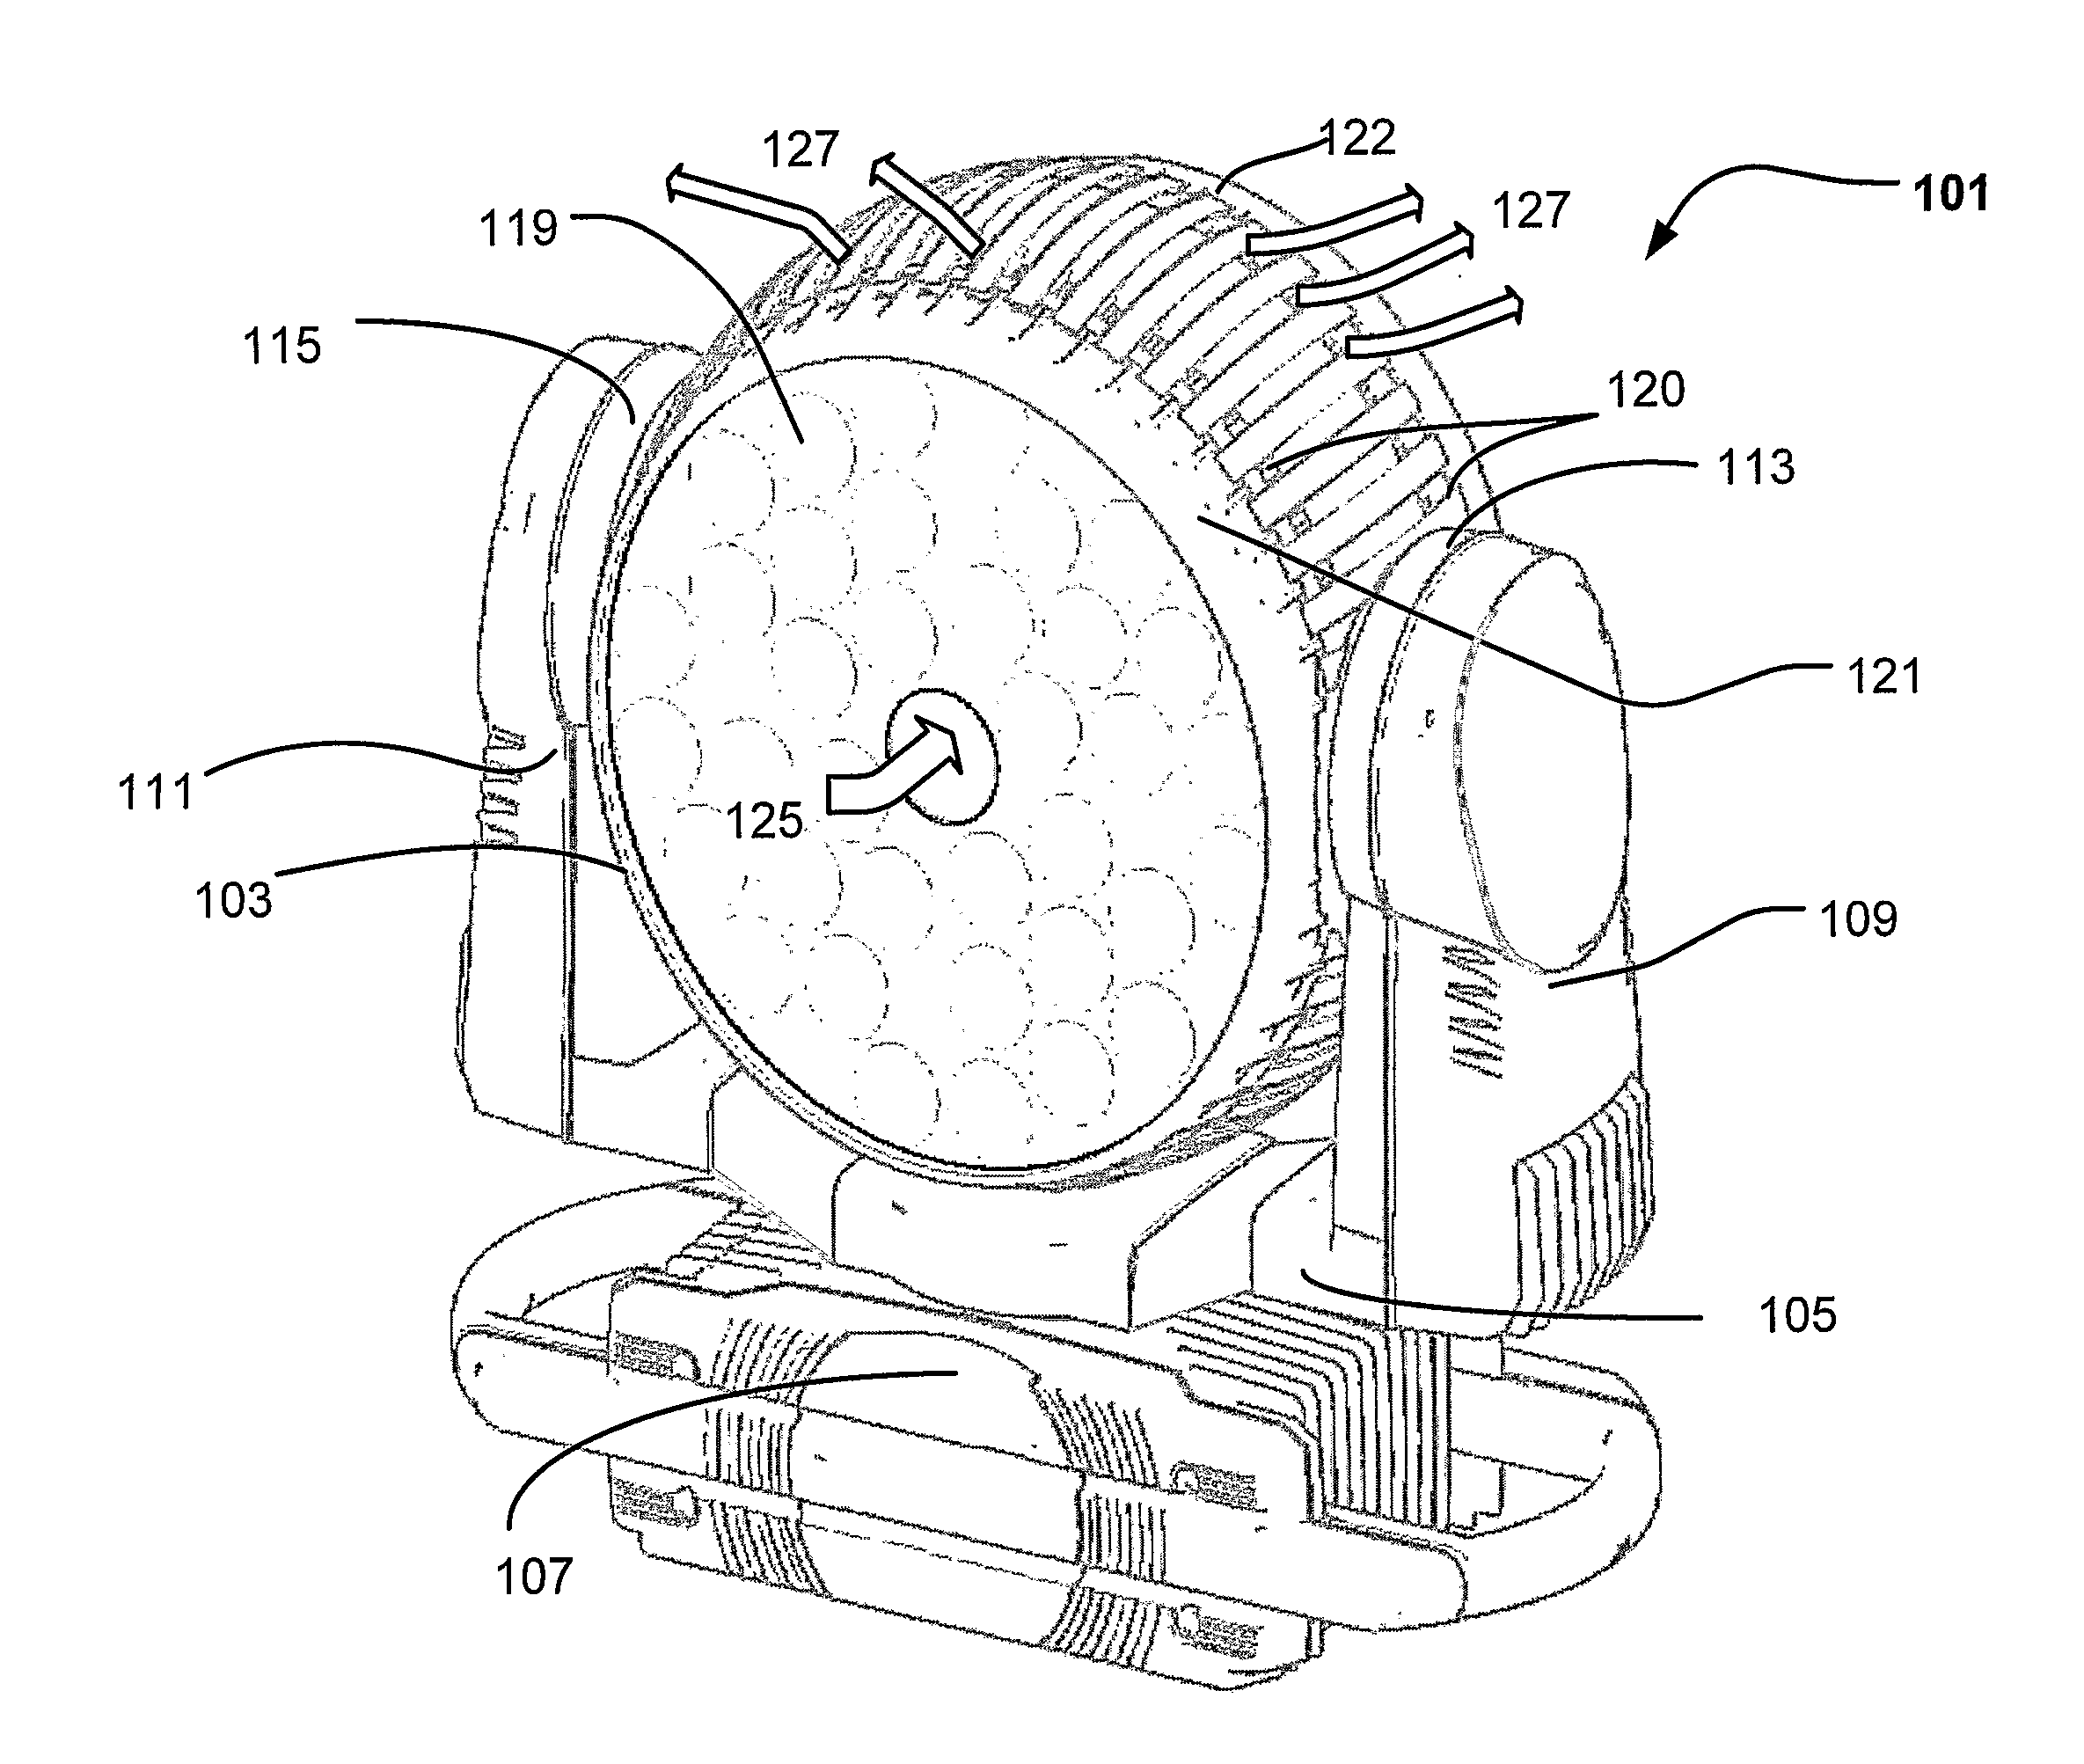 Moving head fixture and cooling module